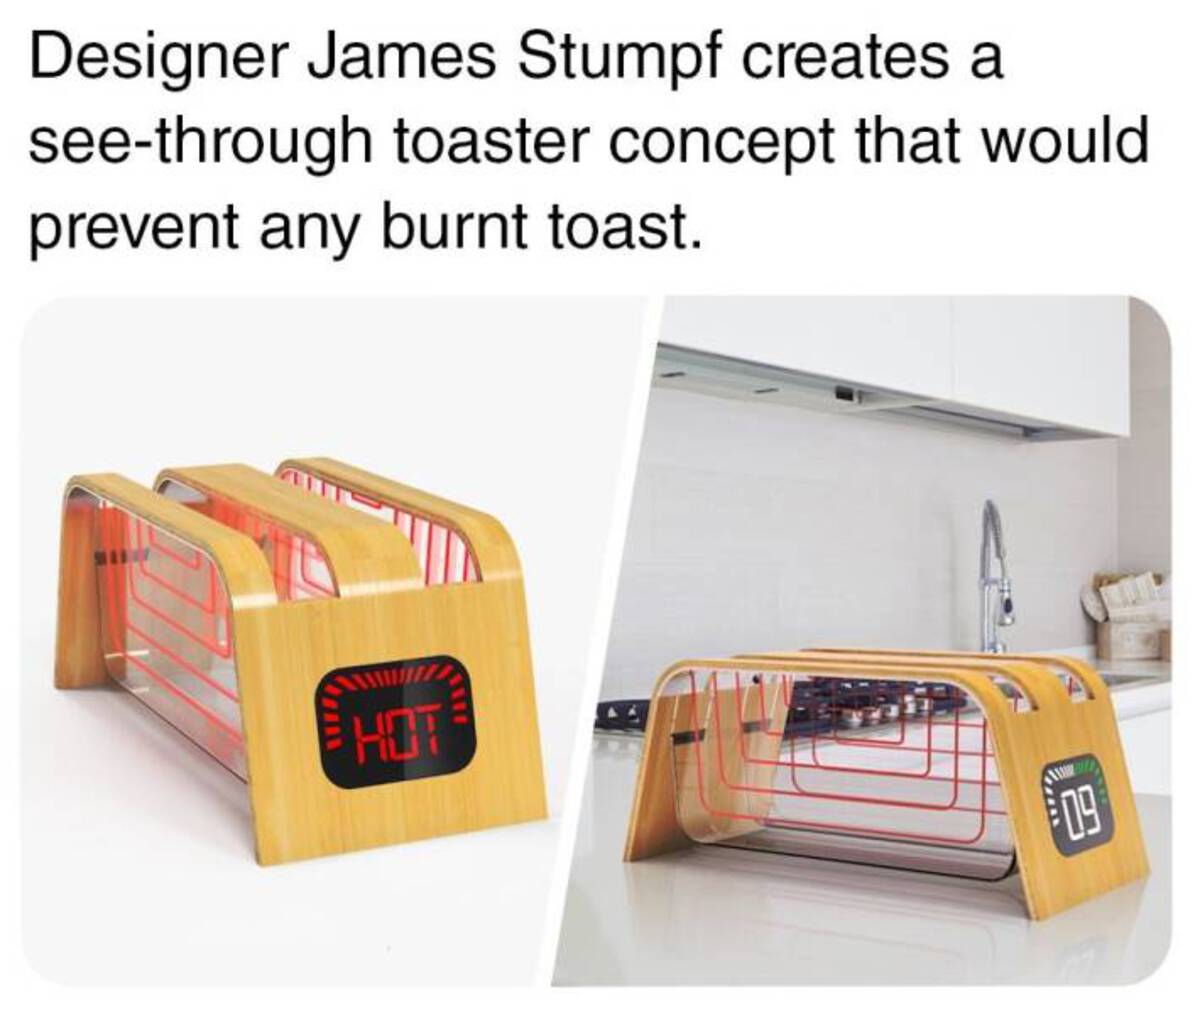 glass toaster - Designer James Stumpf creates a seethrough toaster concept that would prevent any burnt toast. Hot 1111 Eng